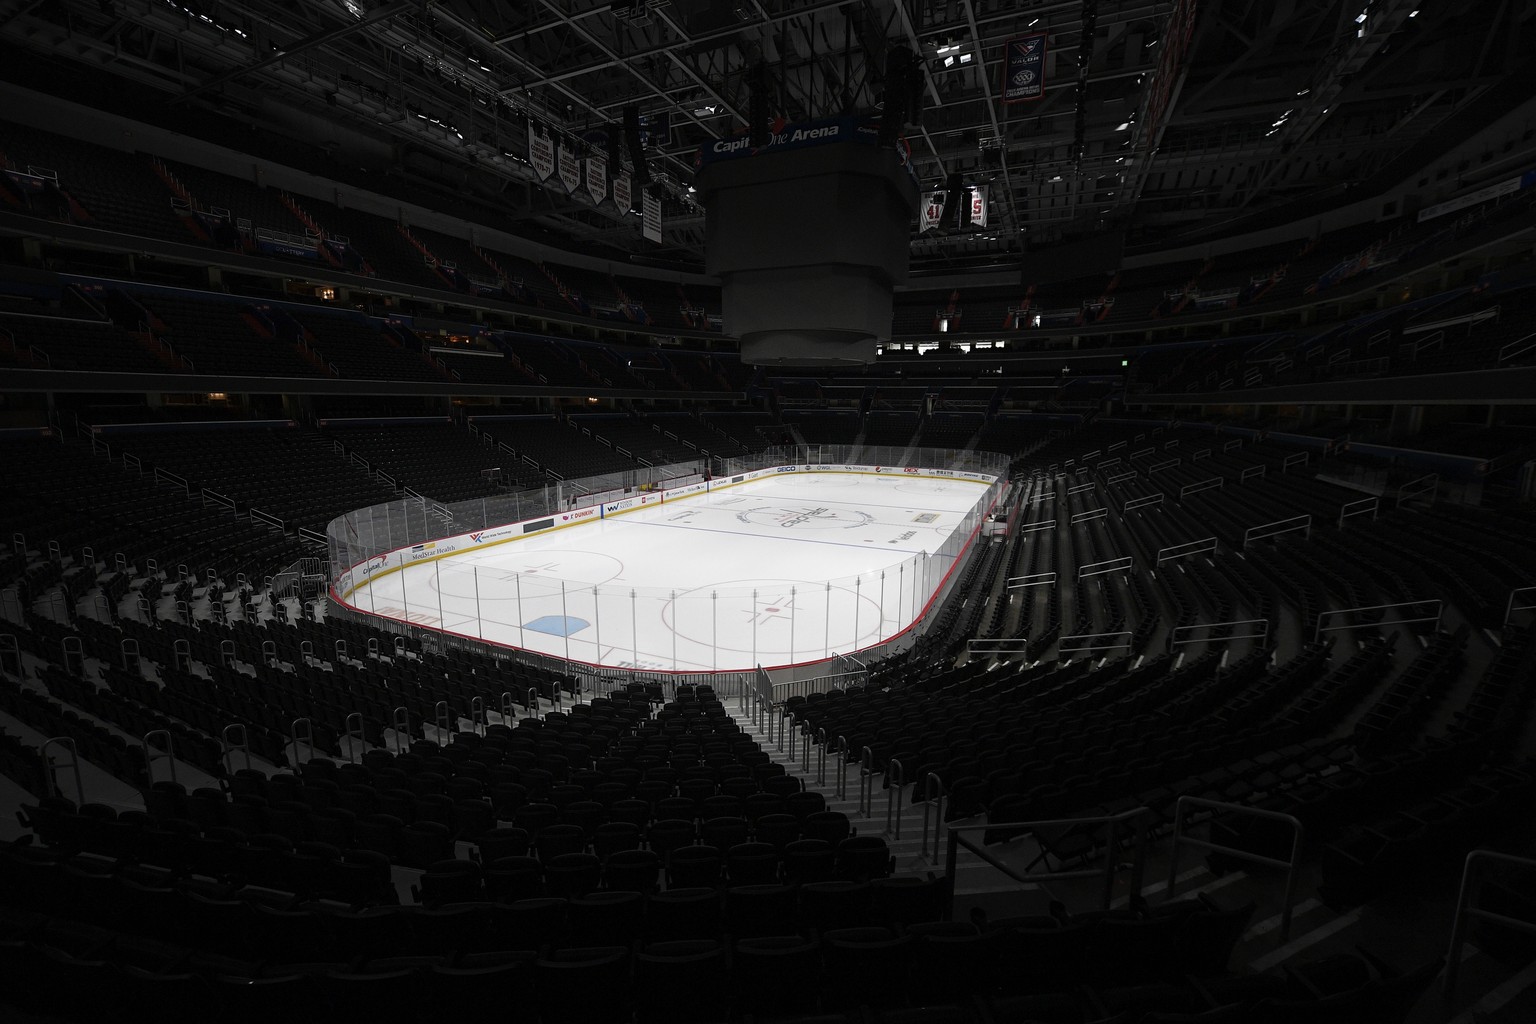 FILE - In this March 12, 2020, file photo, the Capital One Arena, home of the Washington Capitals NHL hockey club, sits empty in Washington. With no games being played, recent sports headlines have ce ...